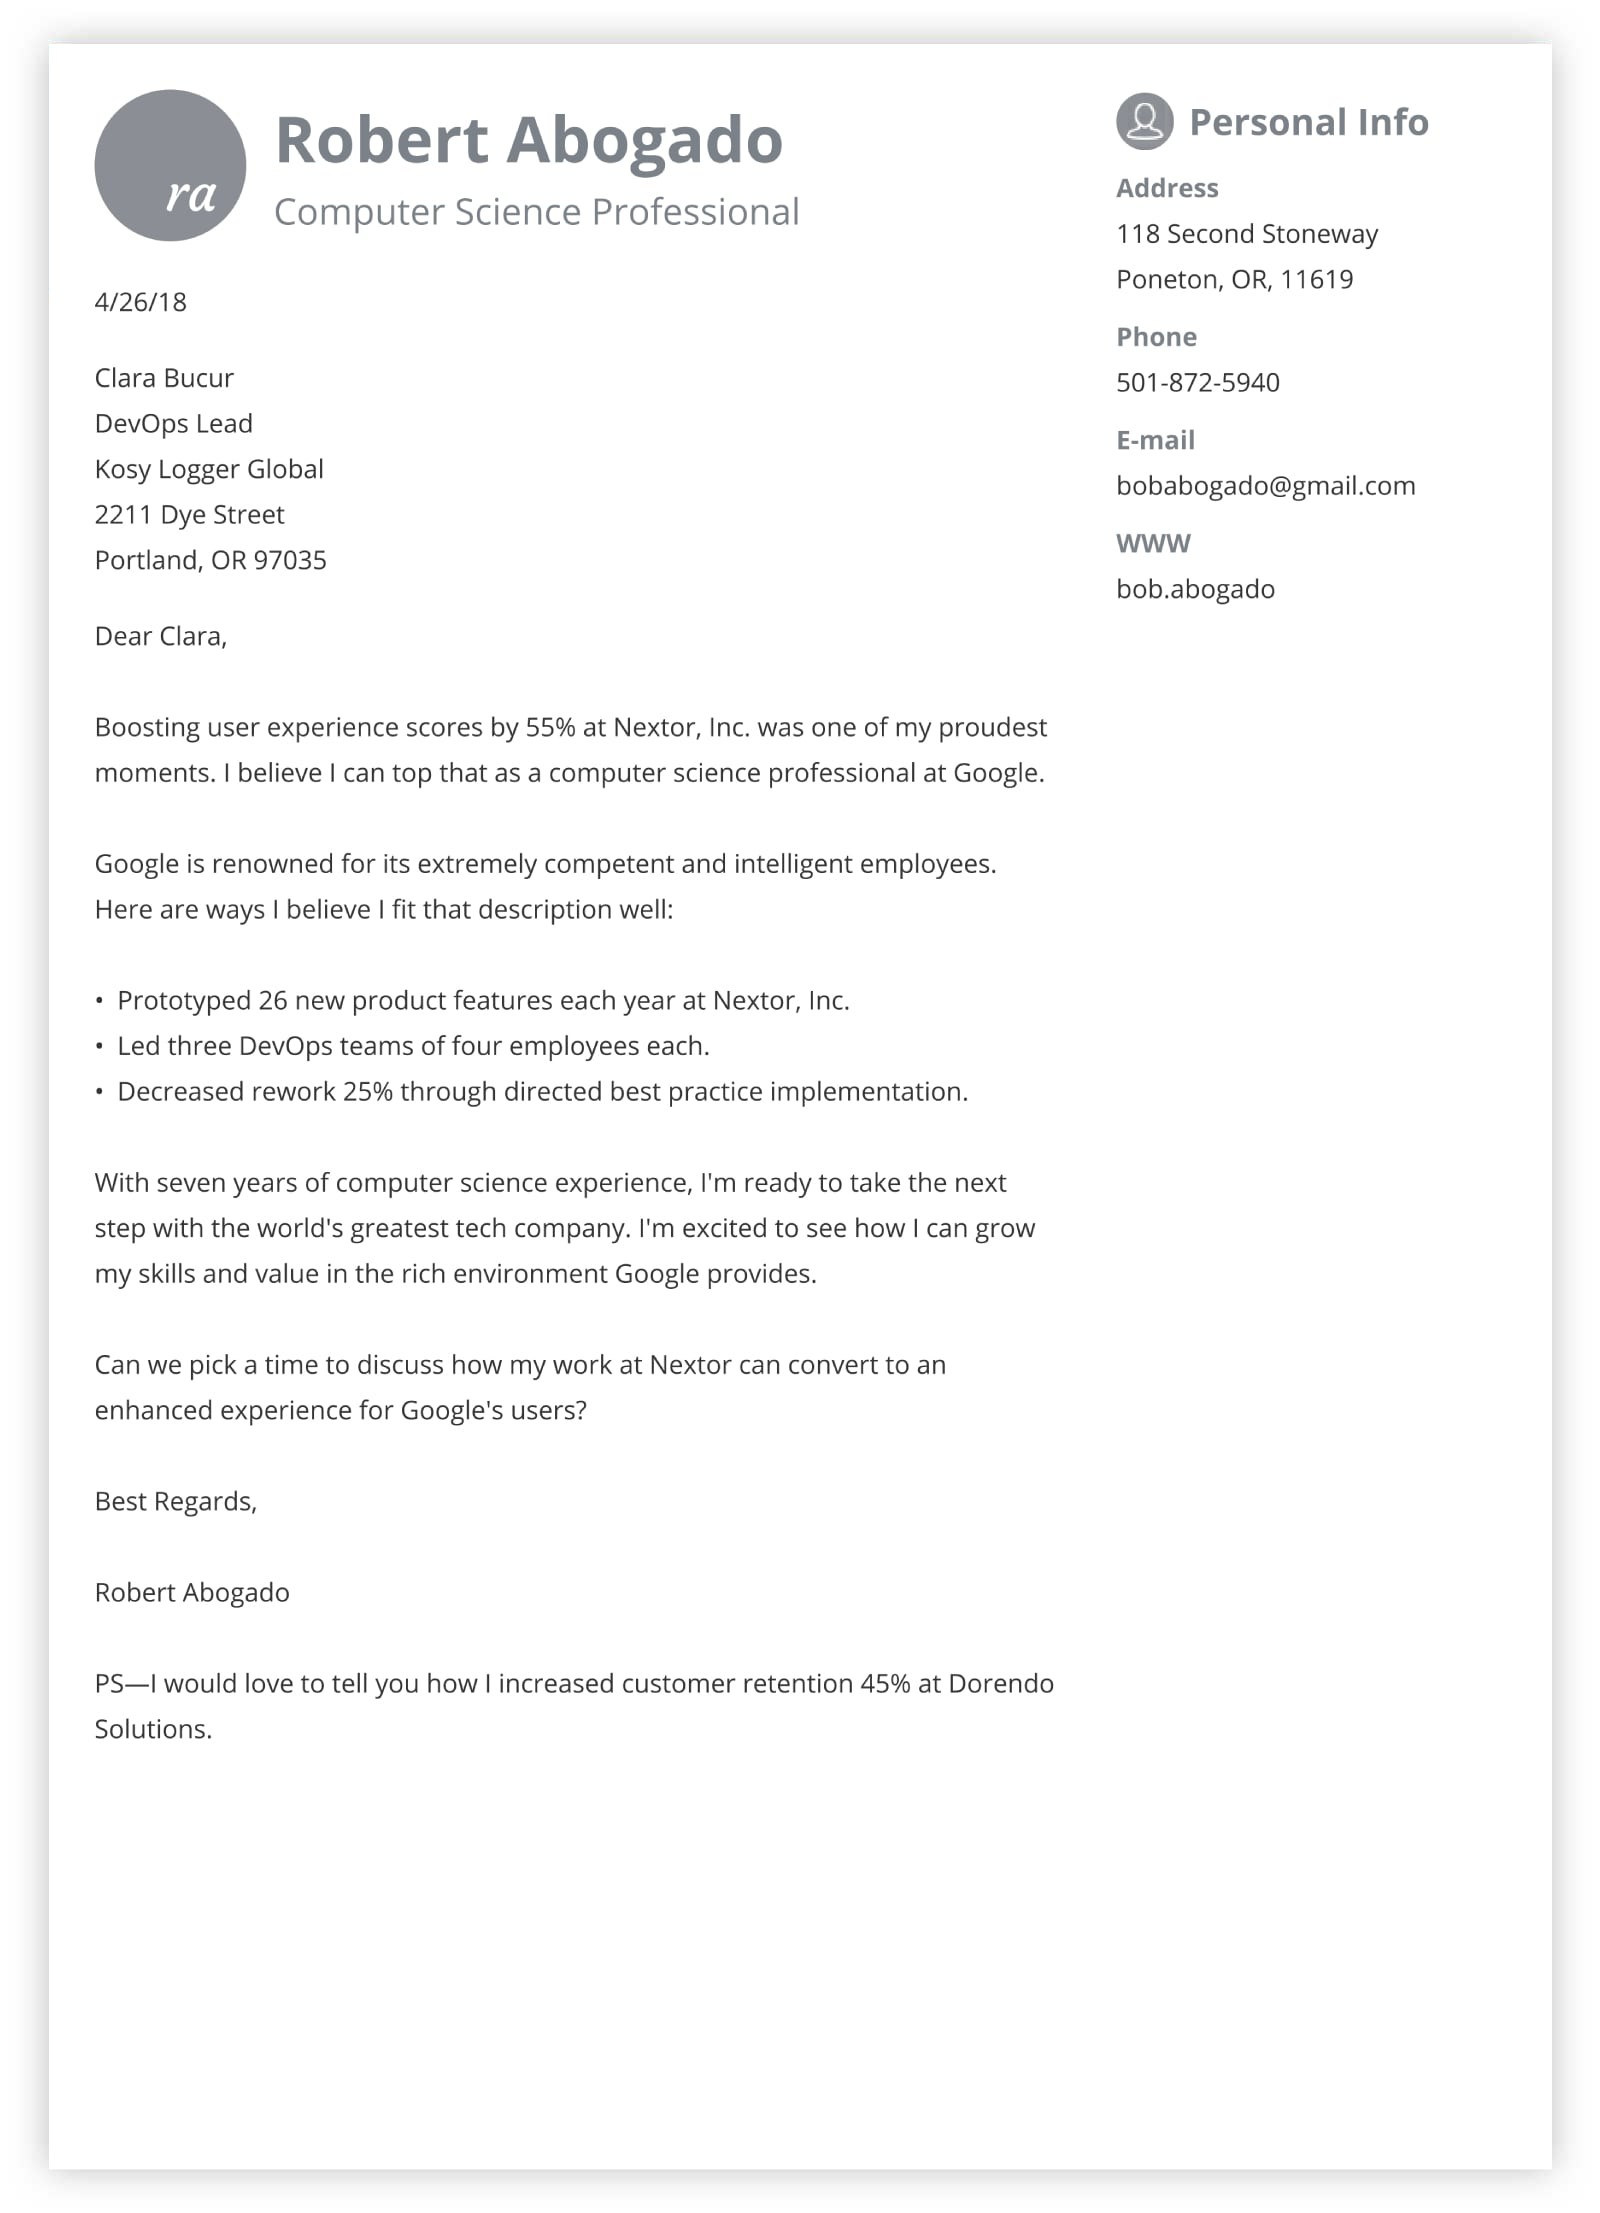 Example Cover Letter Format from cdn-images.zety.com